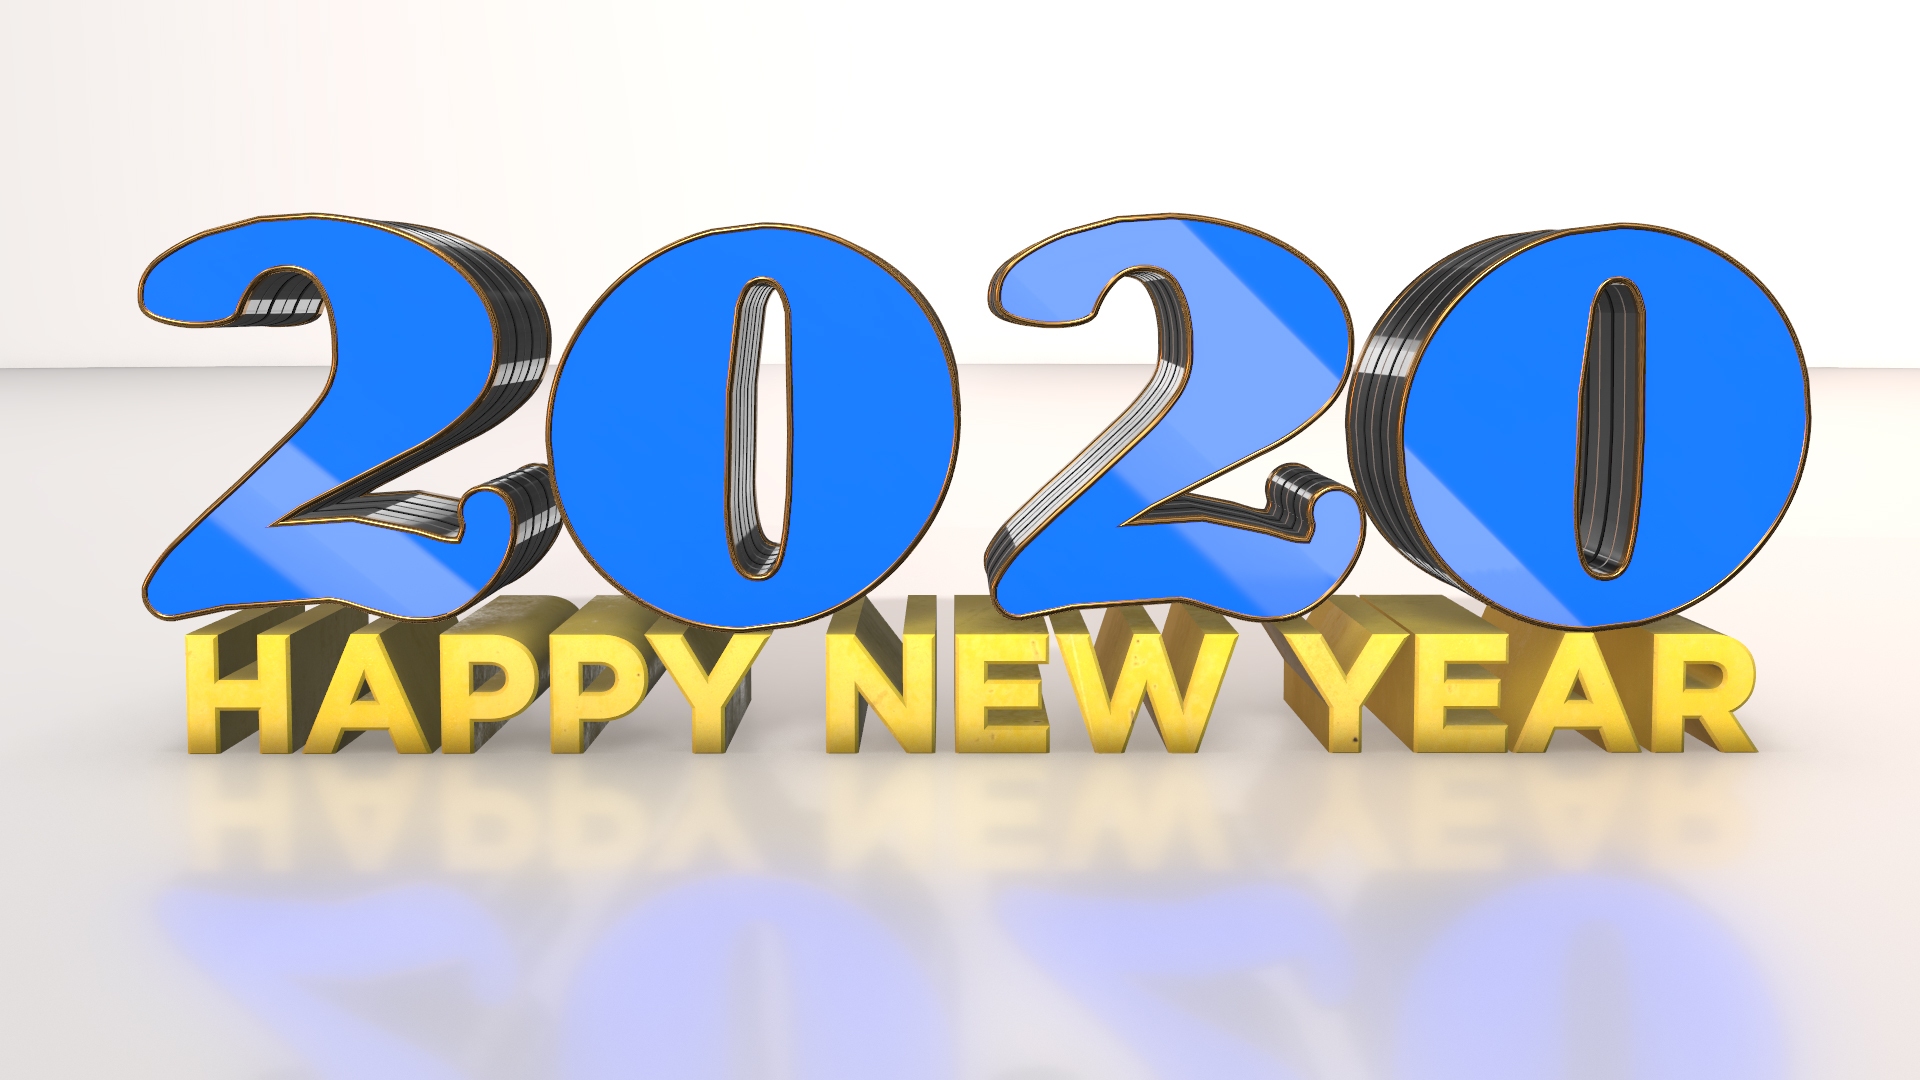 Happy new year 3D designed high quality images download free